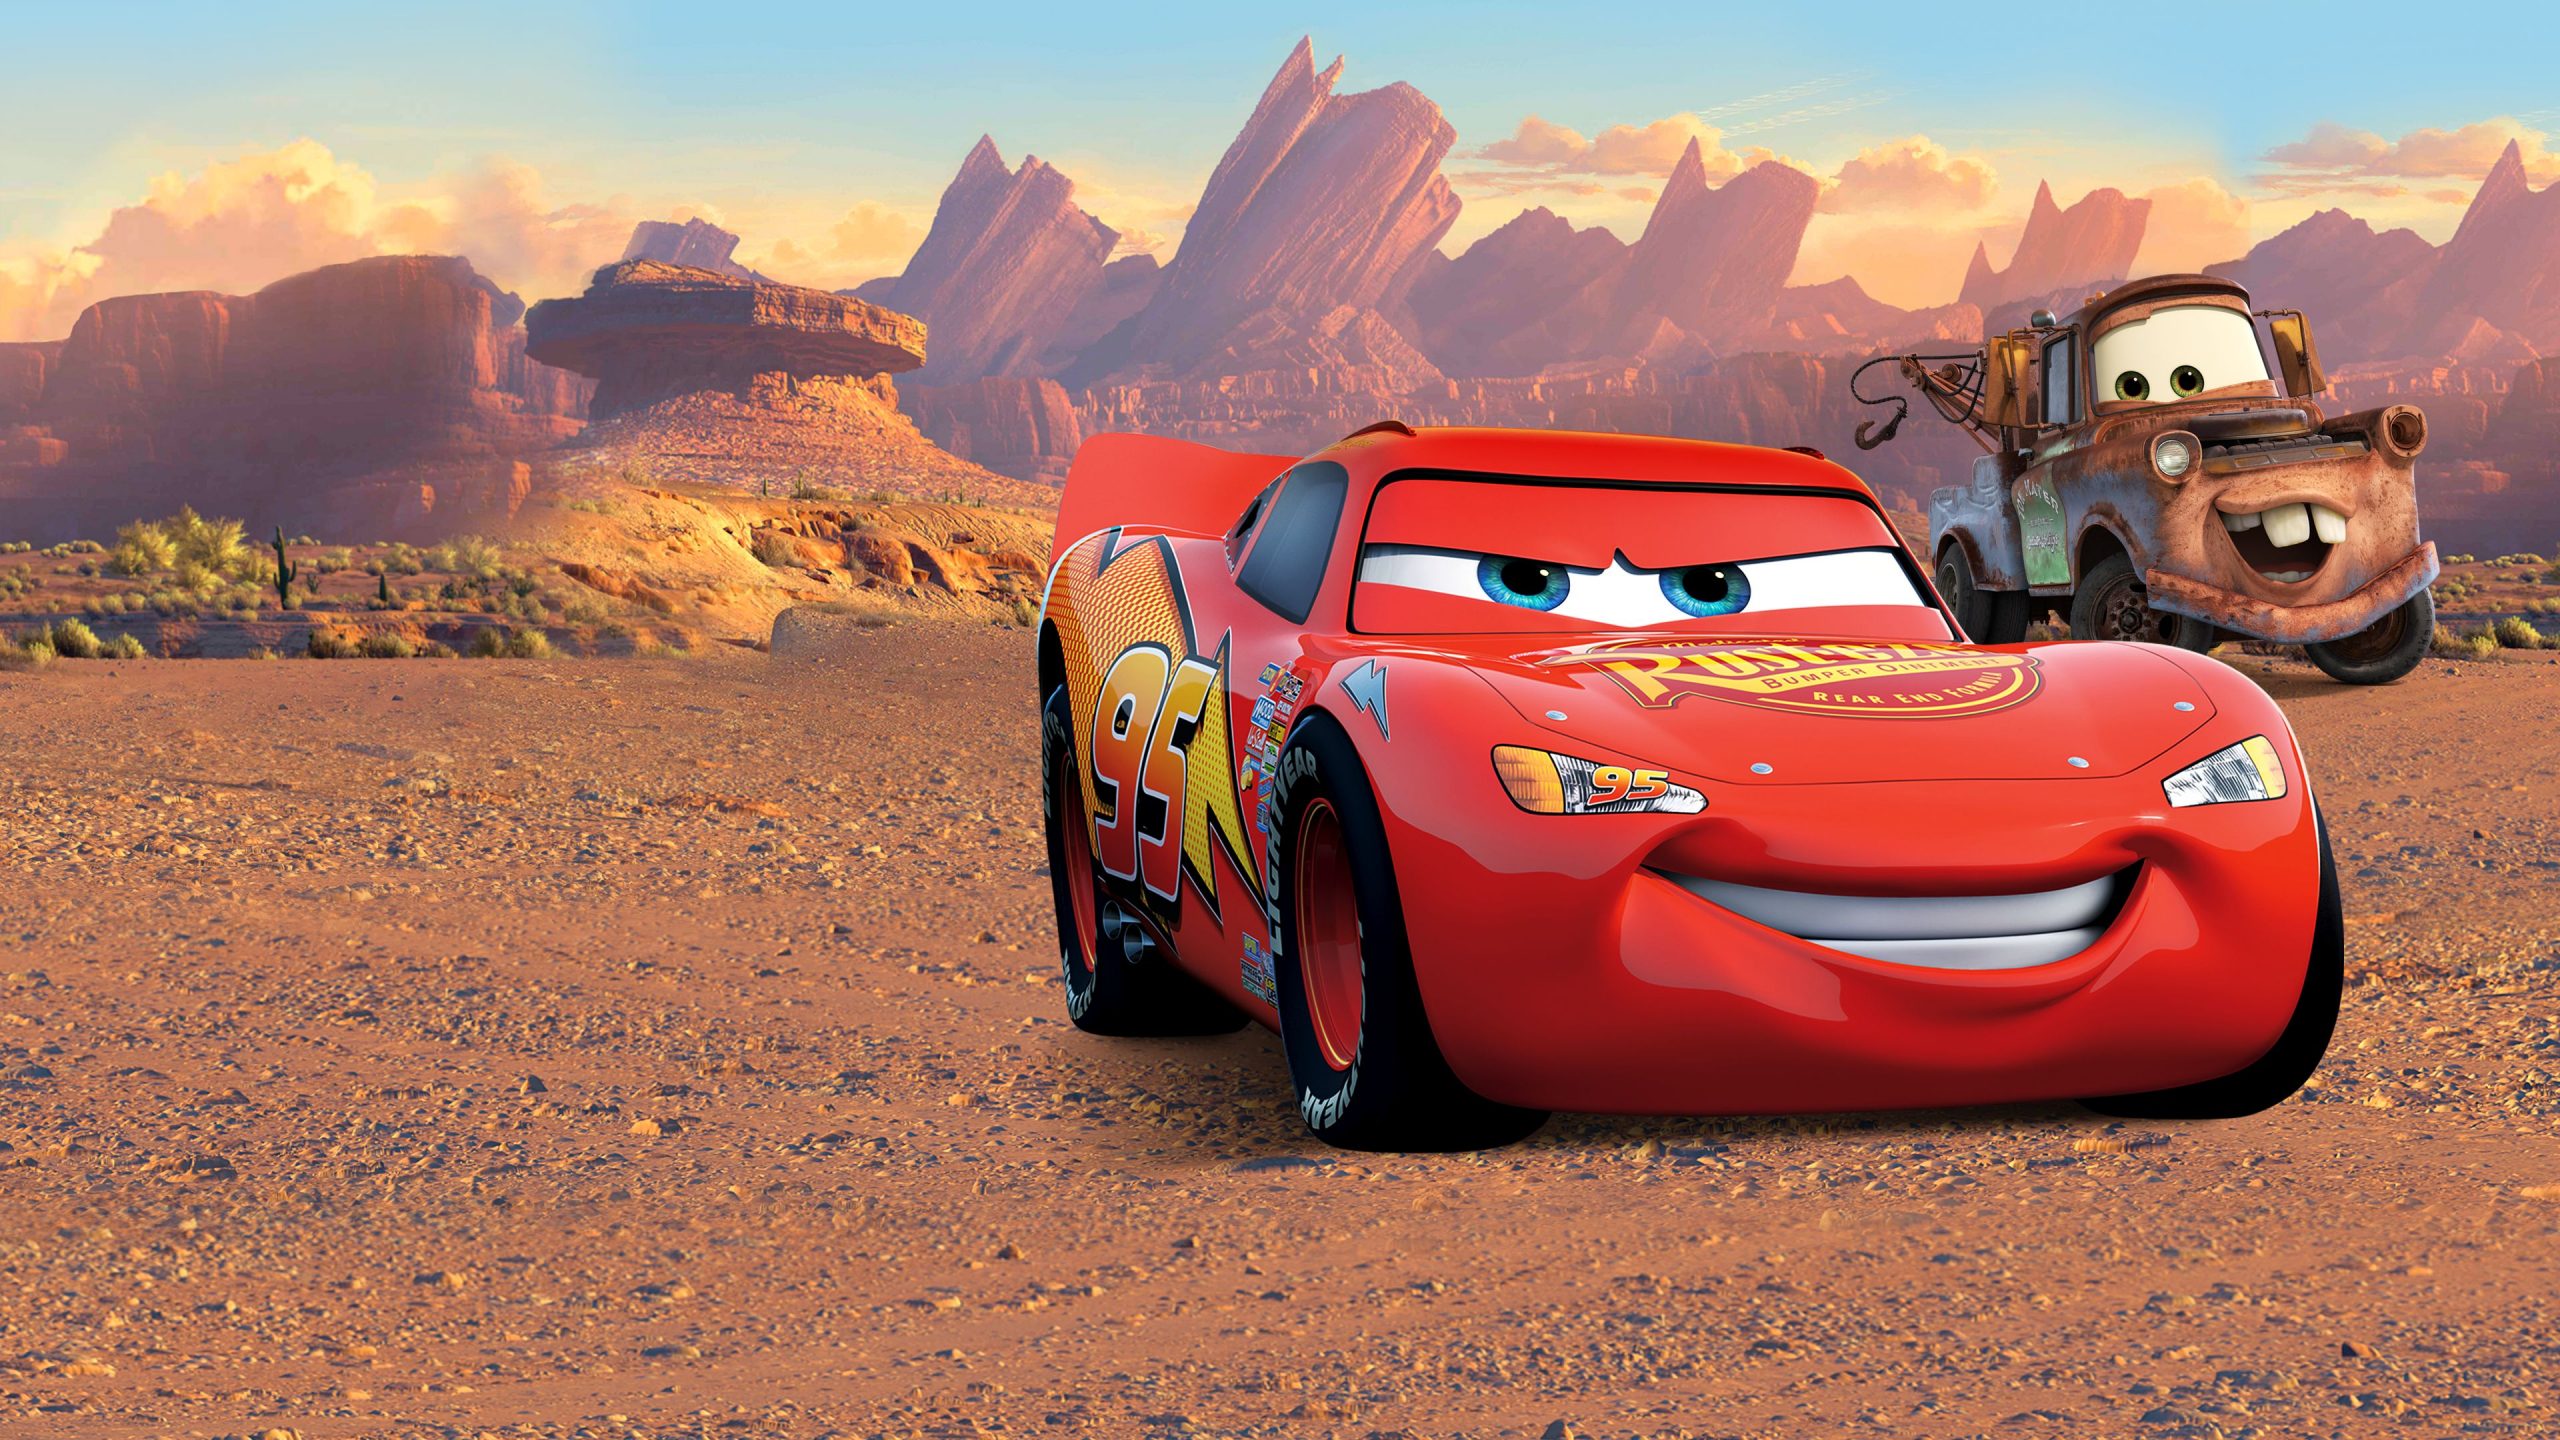 Cars on the Road Release Date? Disney+ Season 1 Premiere 2022 Releases TV